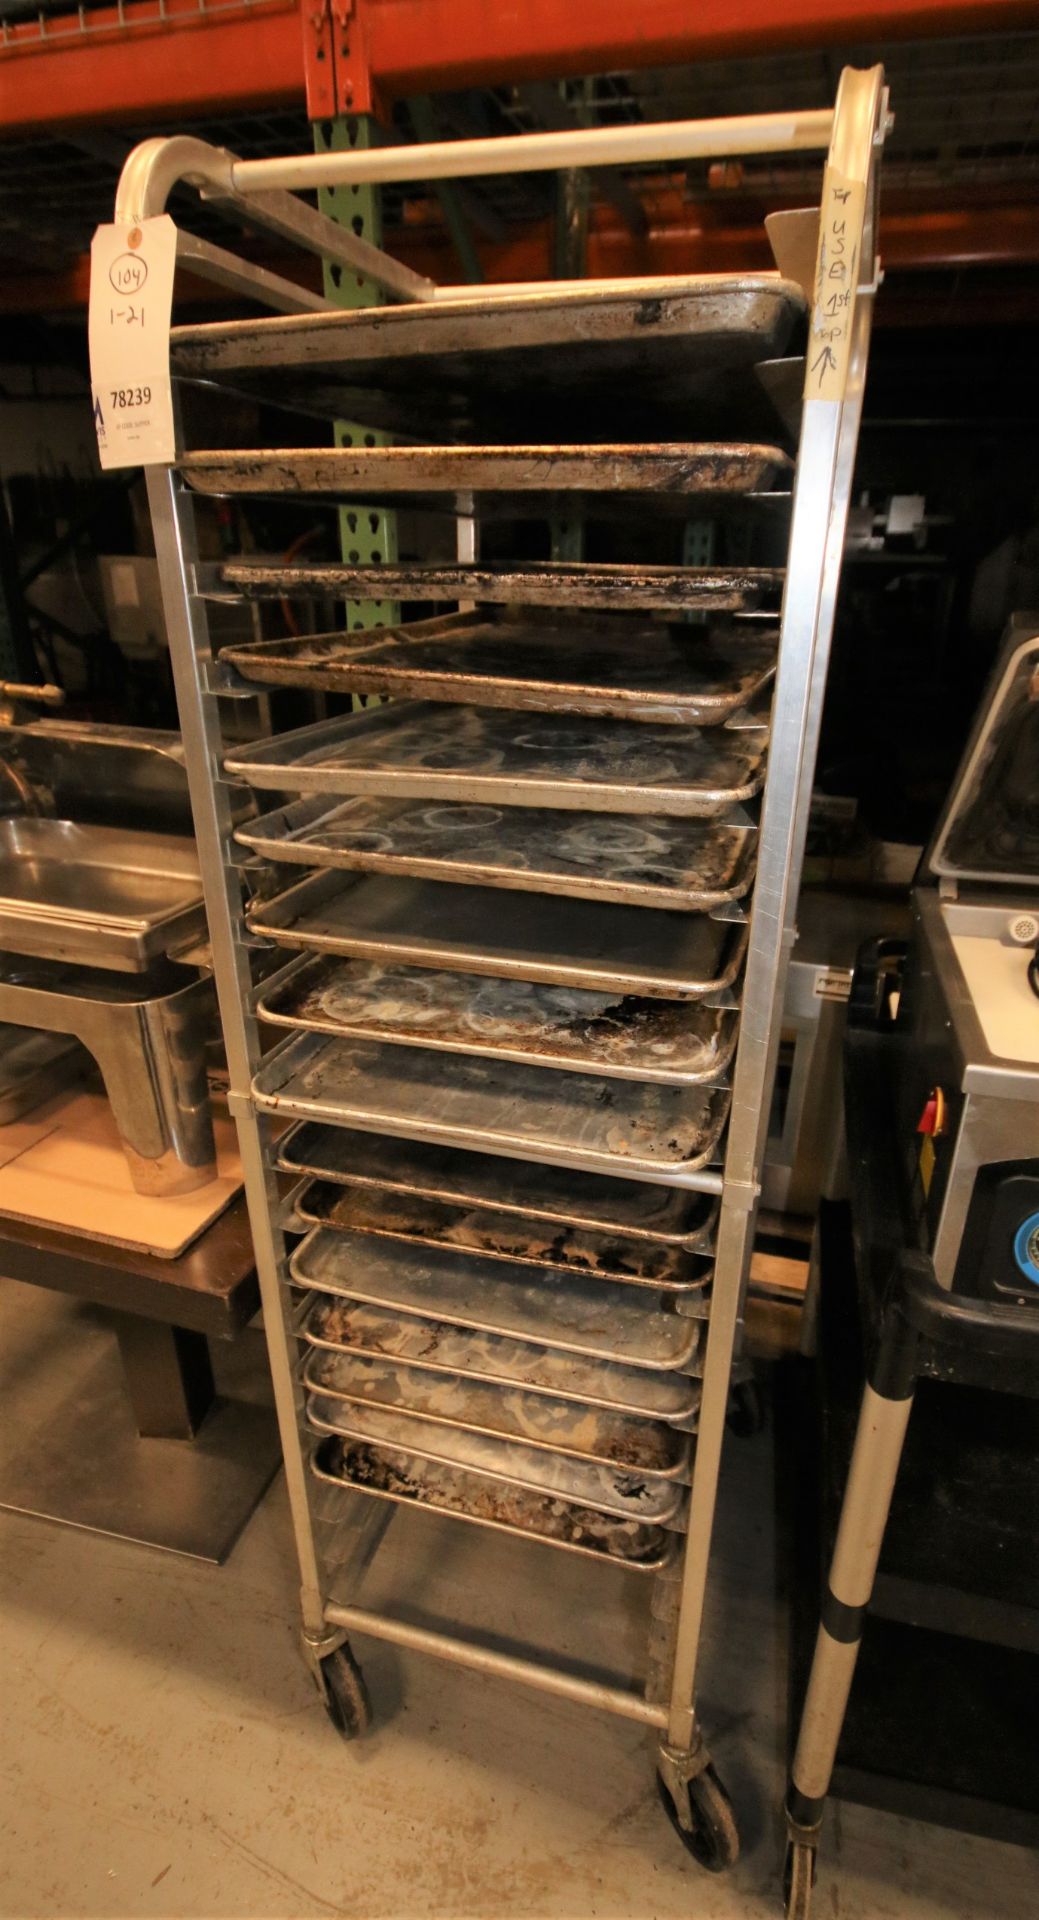 20” W x 26” D x 69” H Tray Rack with 20 Position, with (16) Aluminum Trays (INV#78239)(Located @ the